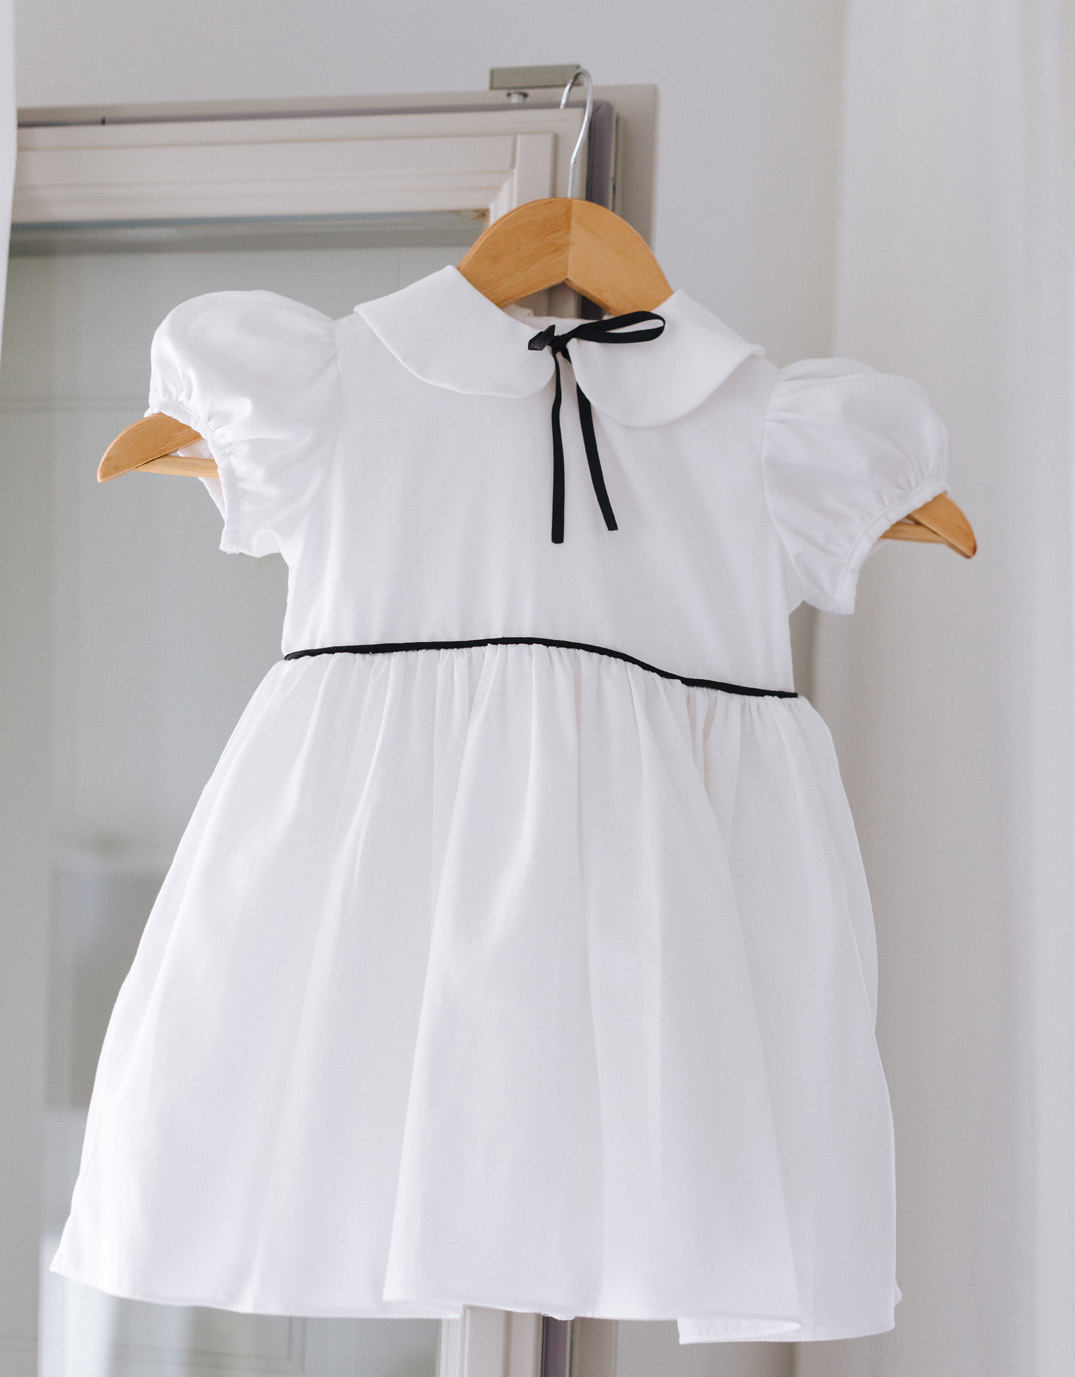 Our Myla flower girl dress is waiting for her owner